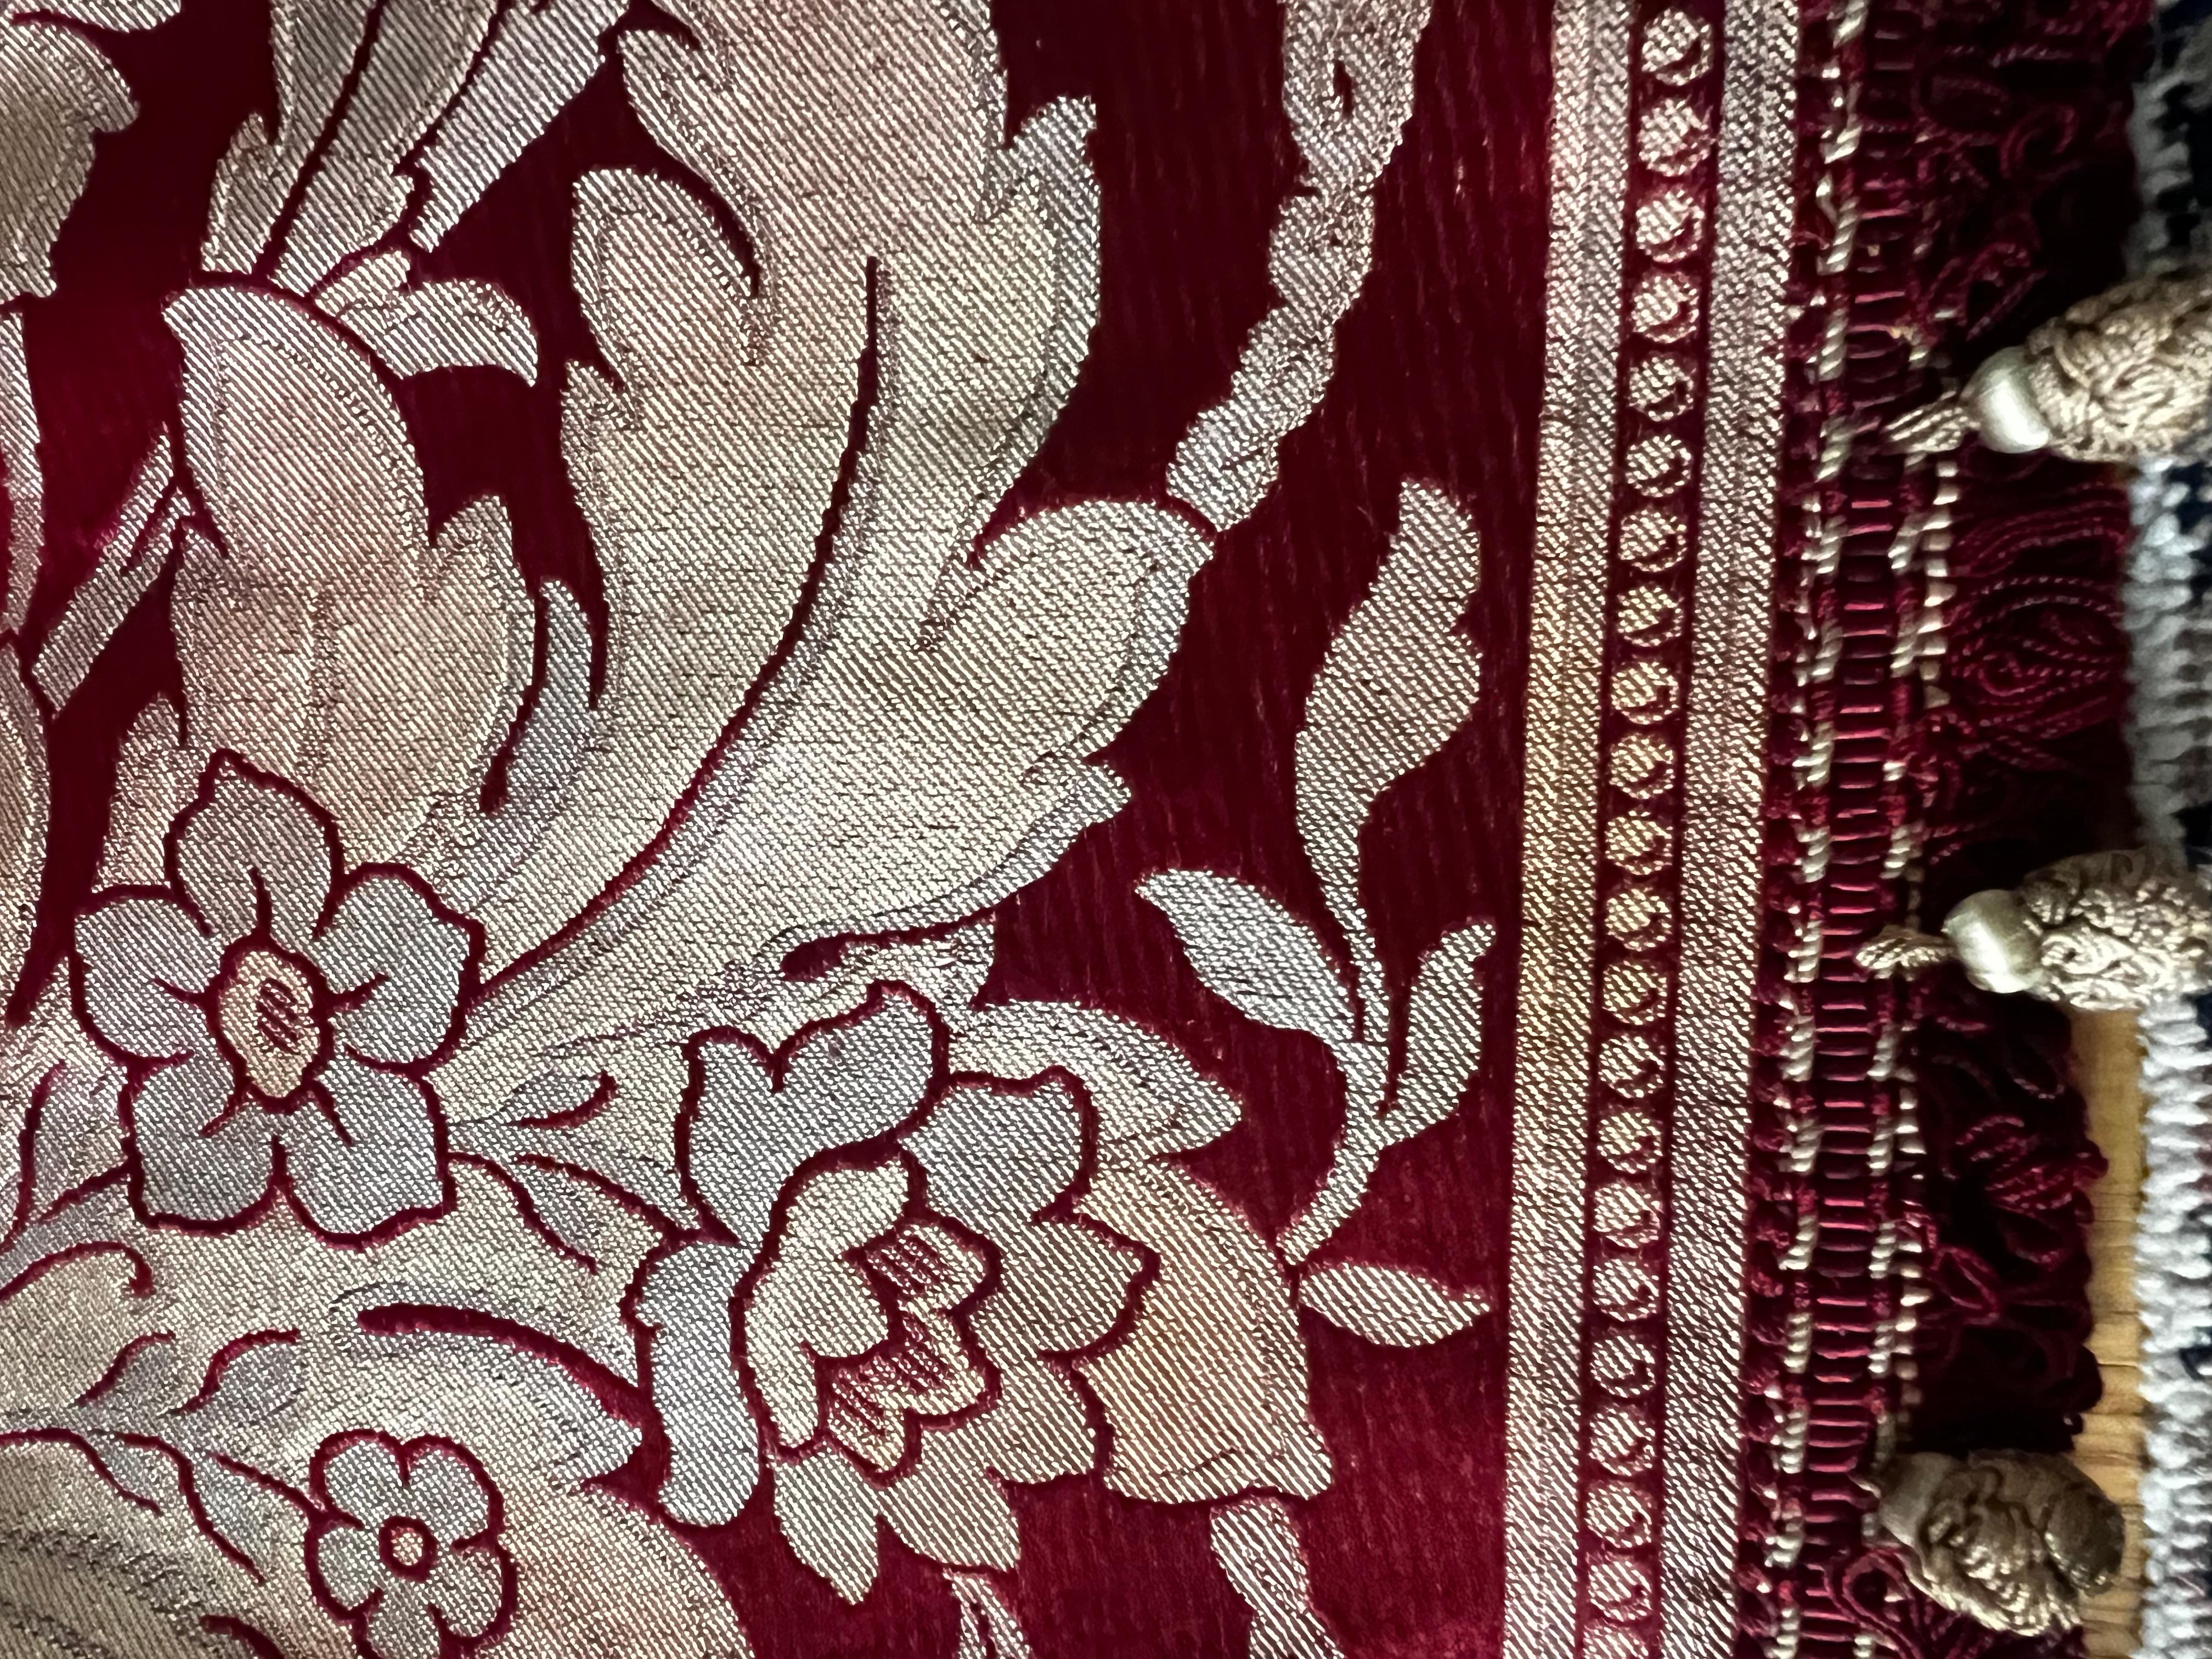 Hand-Woven Exquisite antique 18th century Venetian 100% Silk Fabric For Sale